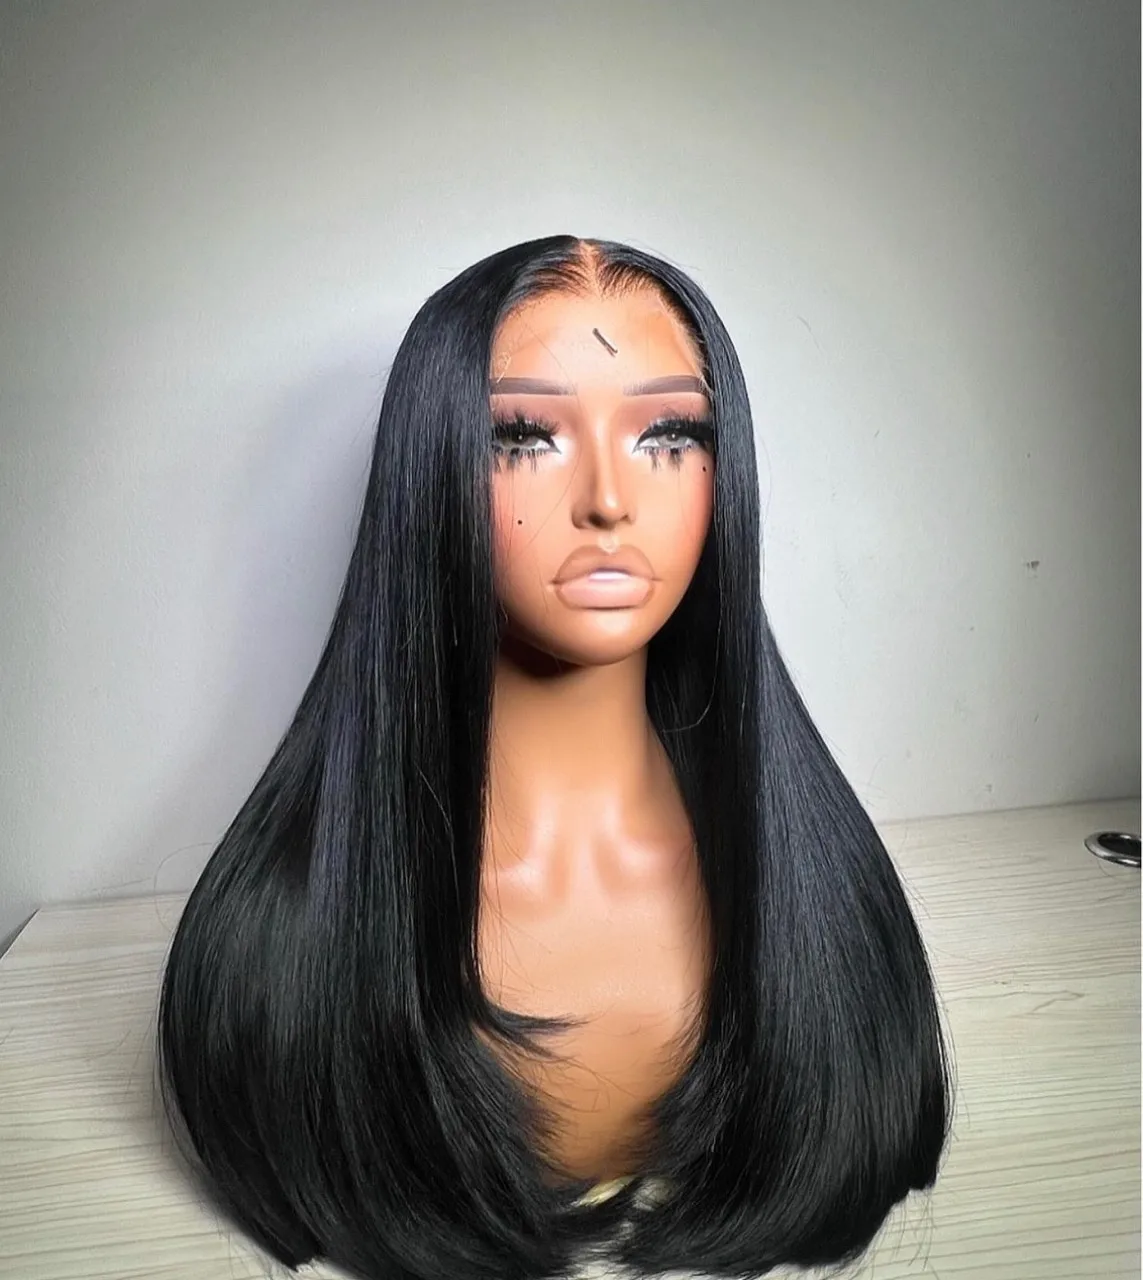 

Black Layered Cut Wig Haircut Butterfly Wigs For Women Synthetic Lace Front Wigs 13X4 Lace Frontal Wig Straight Black Wig